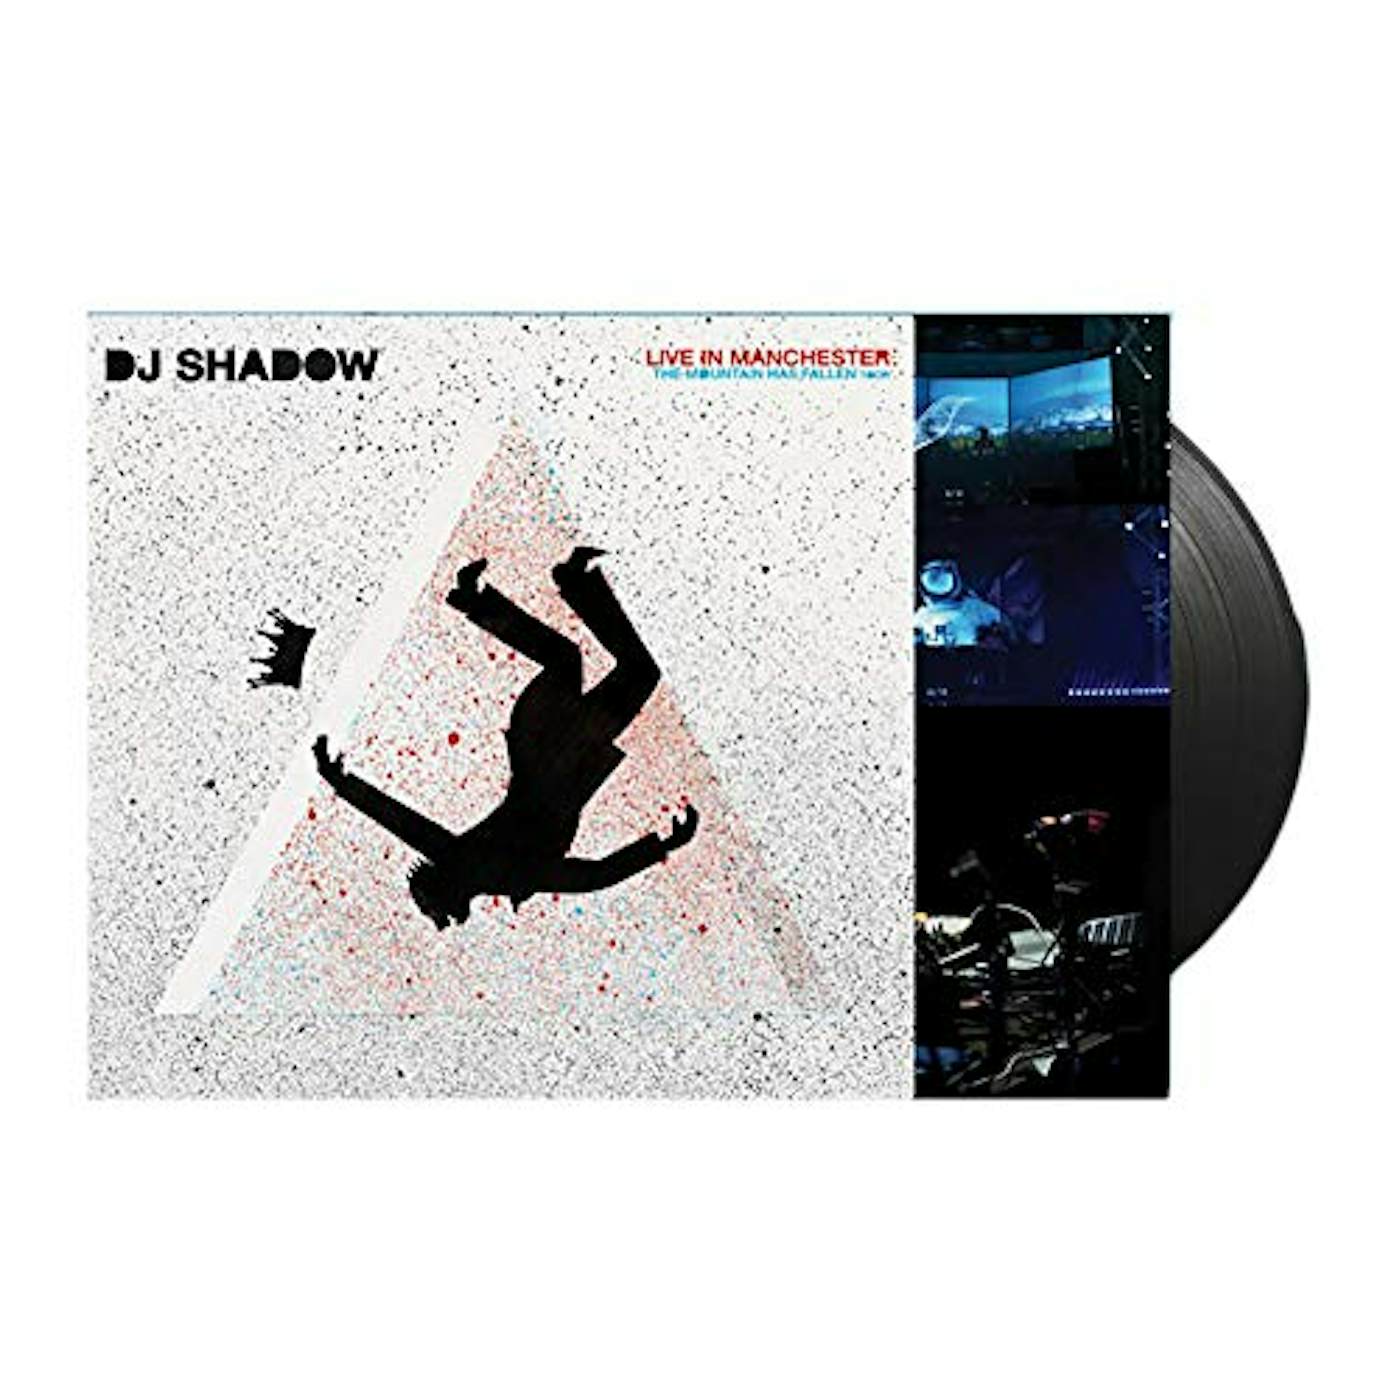 DJ Shadow LIVE IN MANCHESTER Vinyl Record